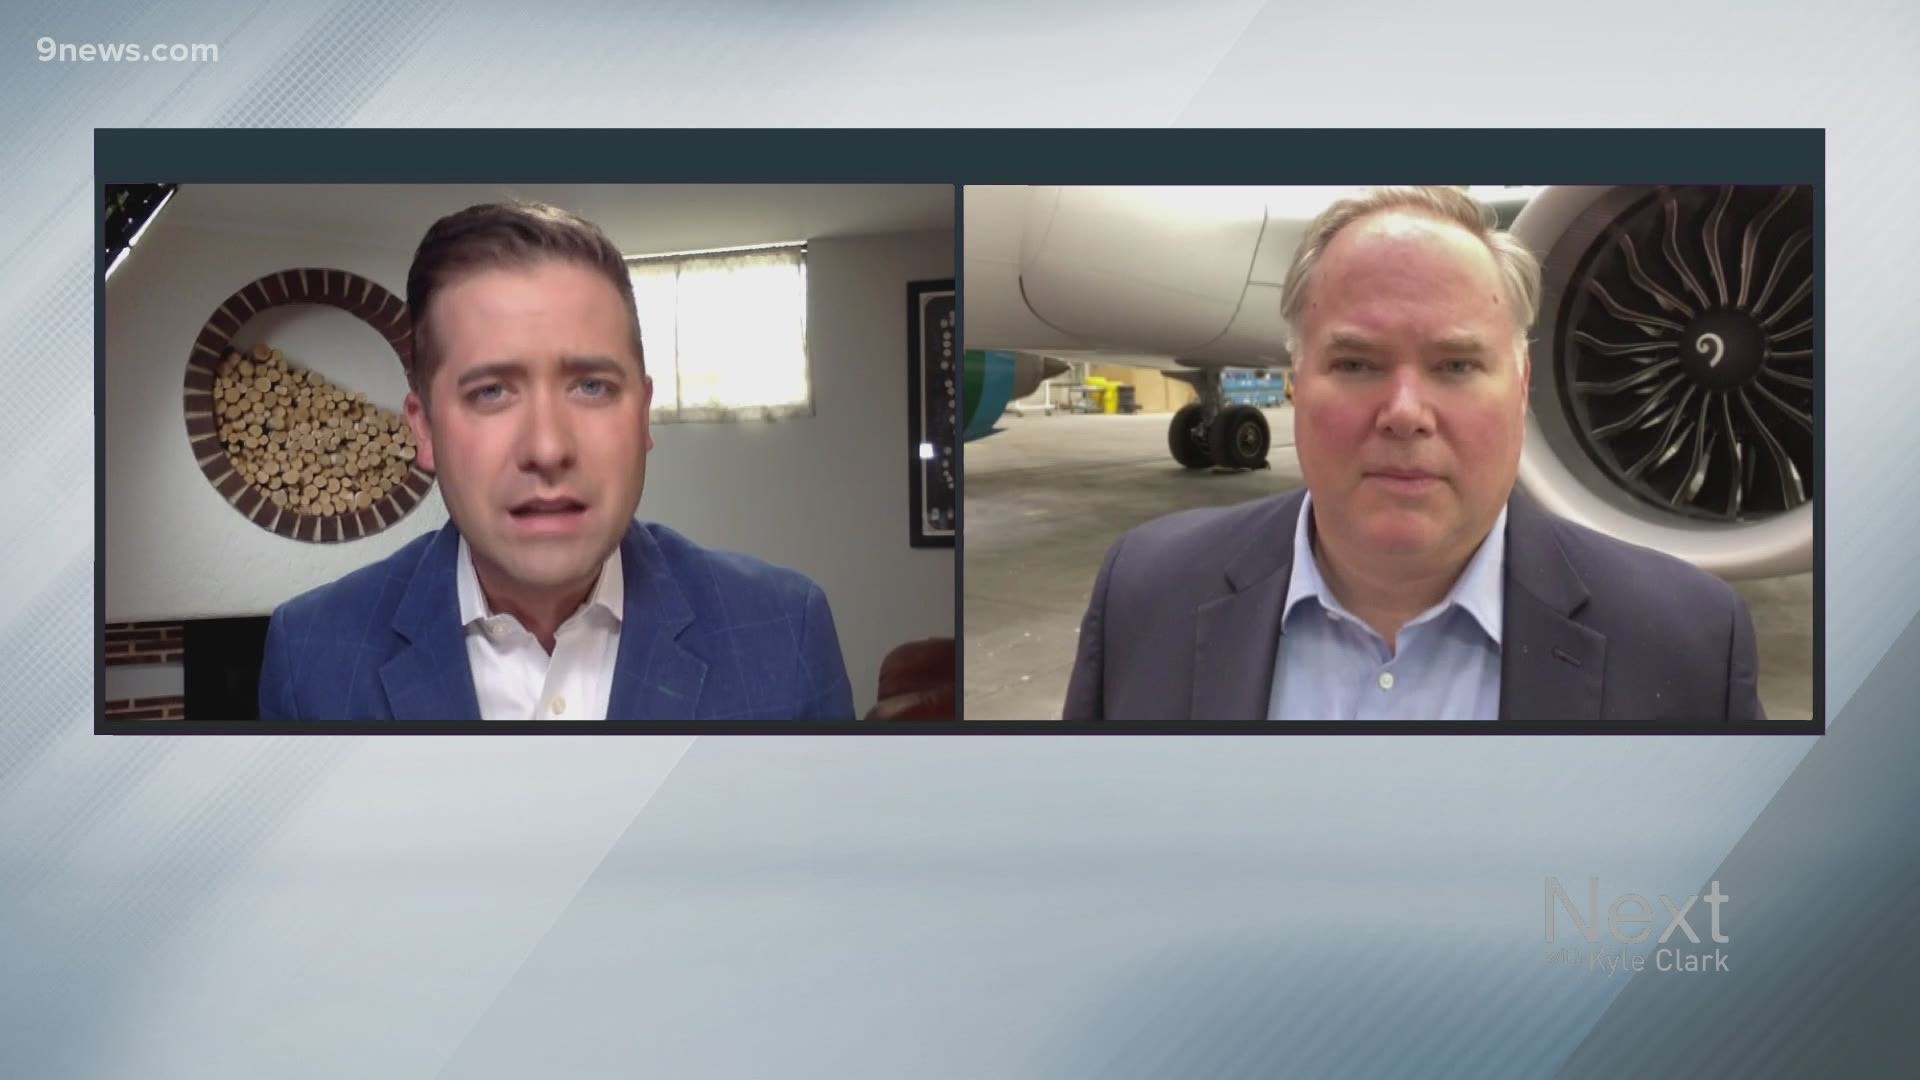 Frontier Airlines announced it will add a "more room" seat assignment option for passengers, guaranteeing an empty middle seat. Kyle spoke with CEO Barry Biffle.